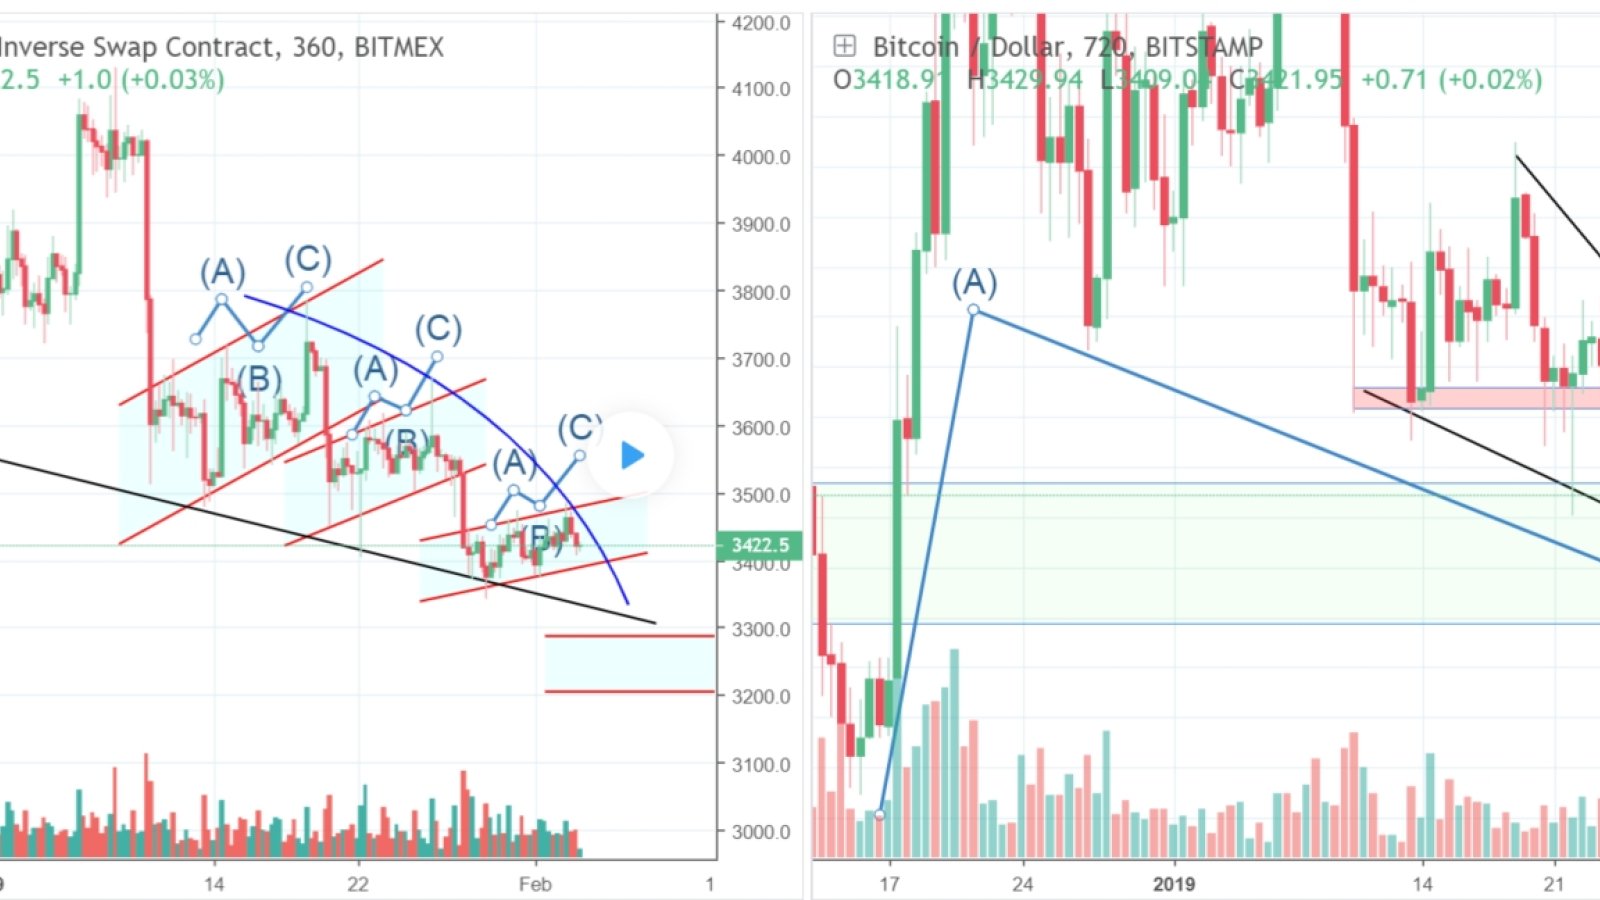 Bitcoin Short-Term Forecast 2019: Up to $6,000, or Down to $1,000? Crypto Experts from TradingView Make Their Bets